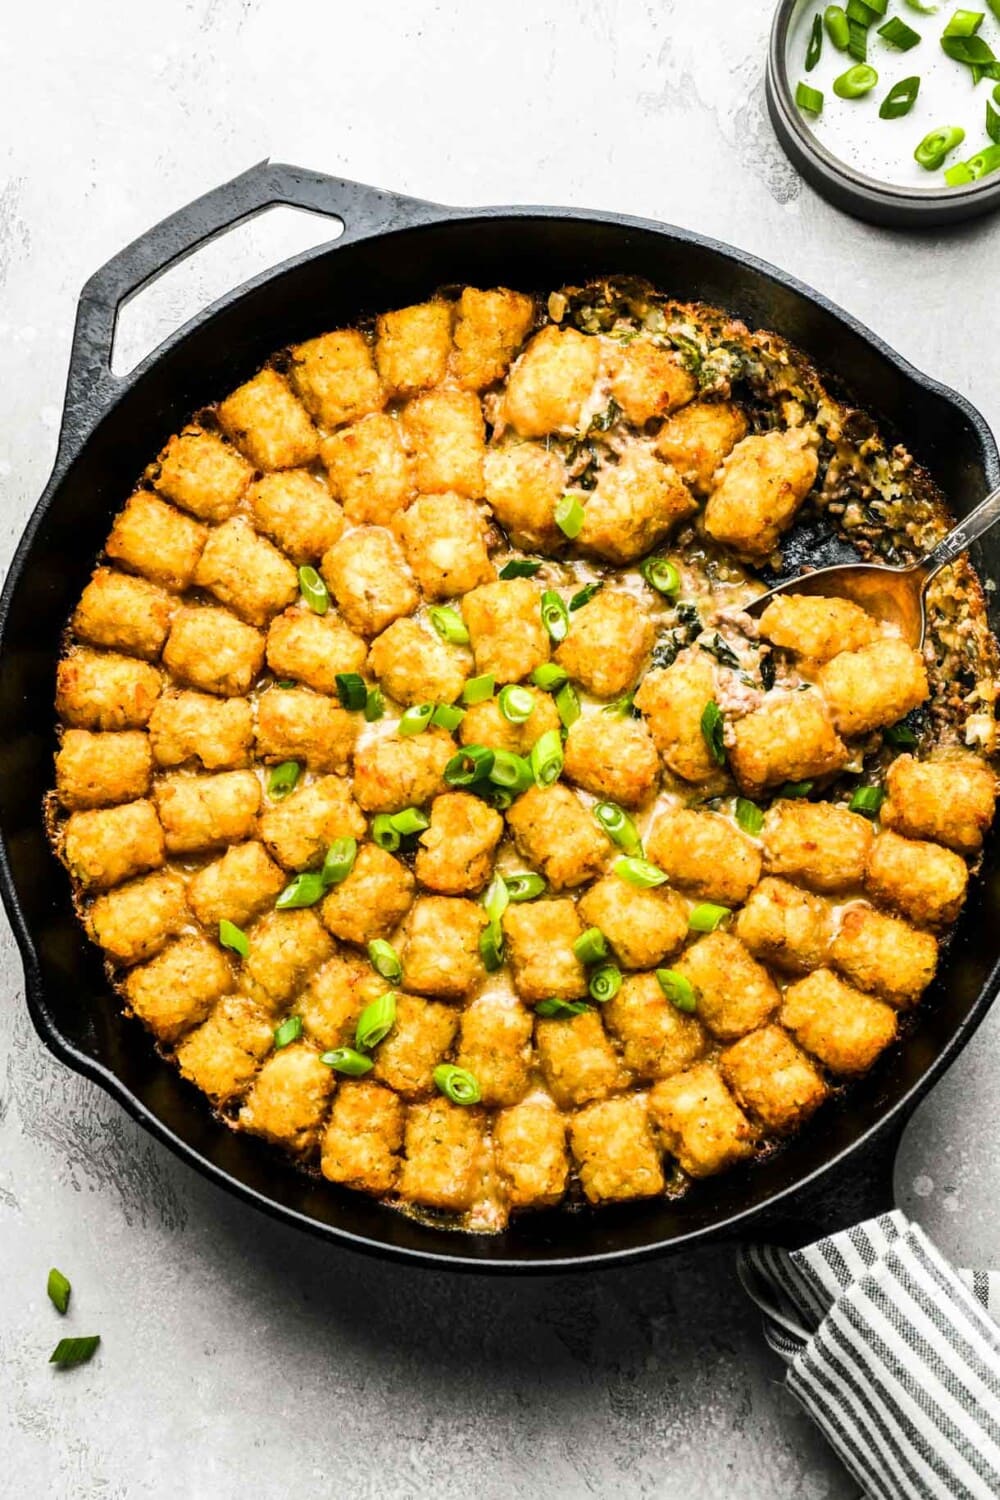 tater tot hotdish in a cast iron skillet with a scoop out of it. linen wrapped around handle.